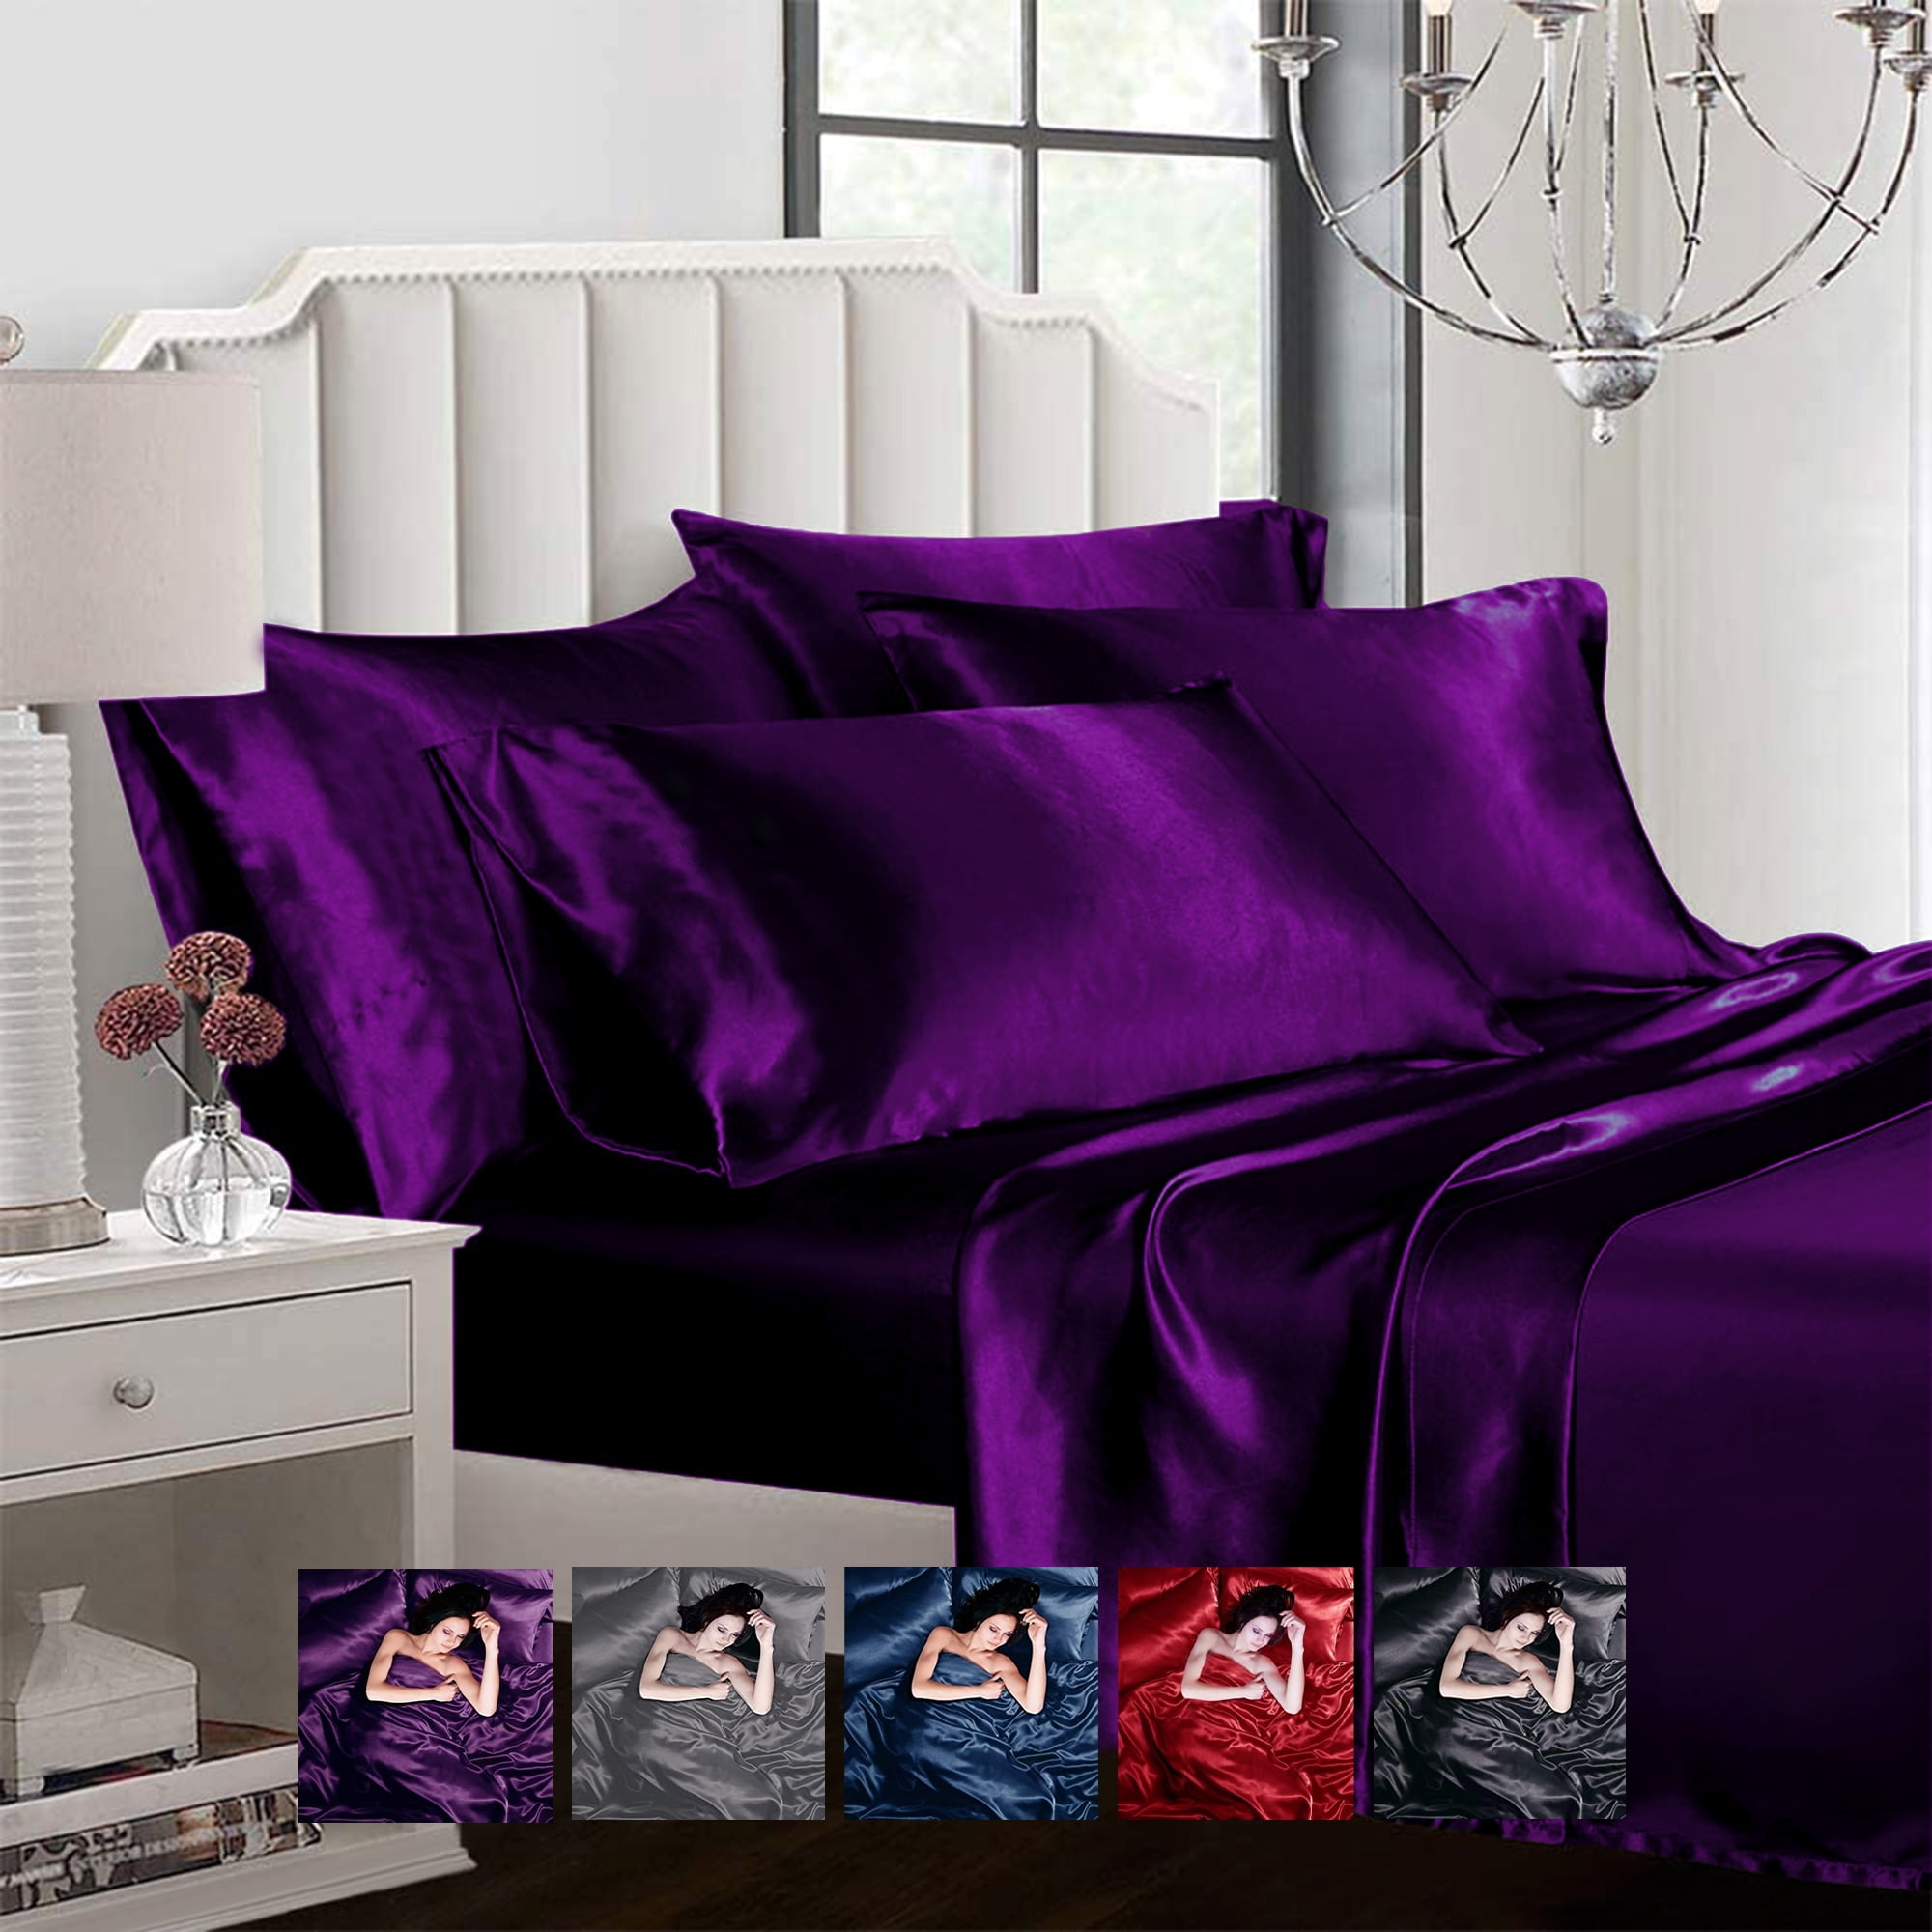 Soft Organic bed sheets Custom sizes Twin Linen Fitted sheet in Dark Purple color in Bohemian Style King Full Queen Double